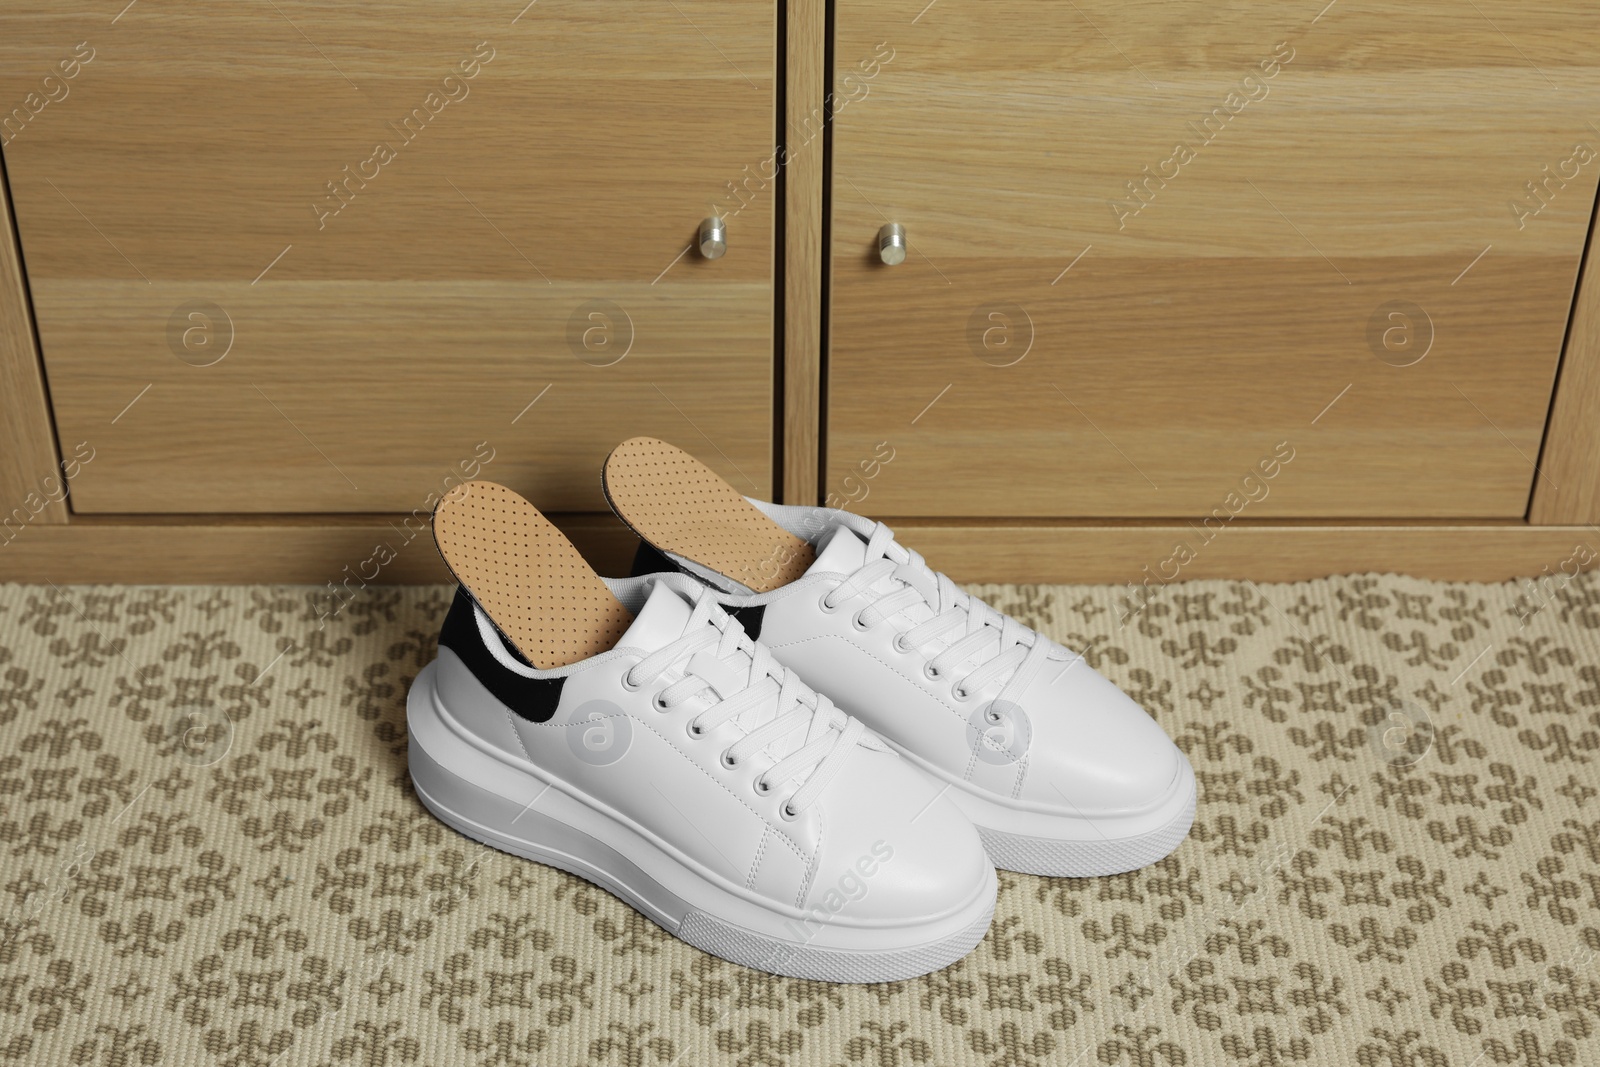 Photo of Orthopedic insoles in shoes on floor near drawer